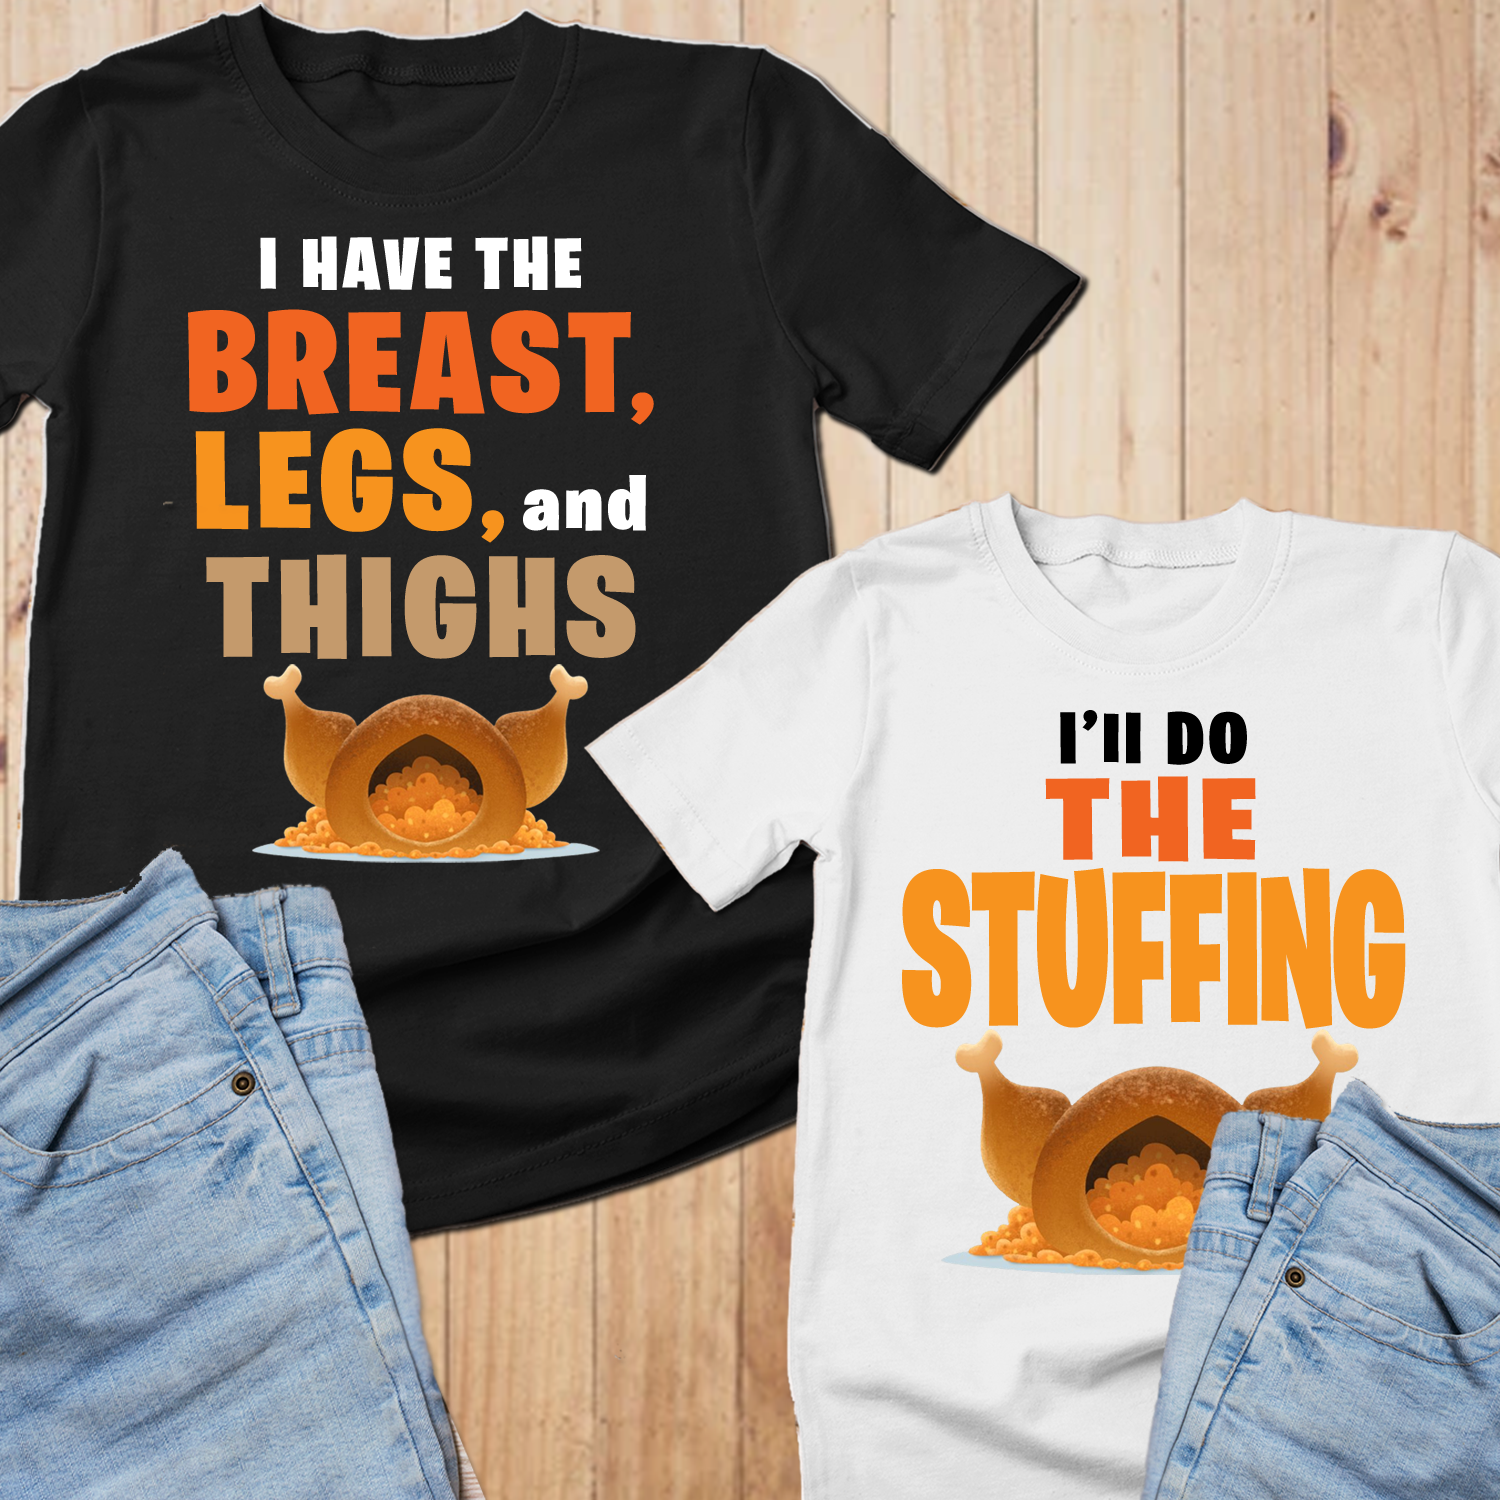 I'll do the stuffing thanksgiving shirts for couples, couple thanksgiving shirt, thanksgiving couple shirts - Wilson Design Group